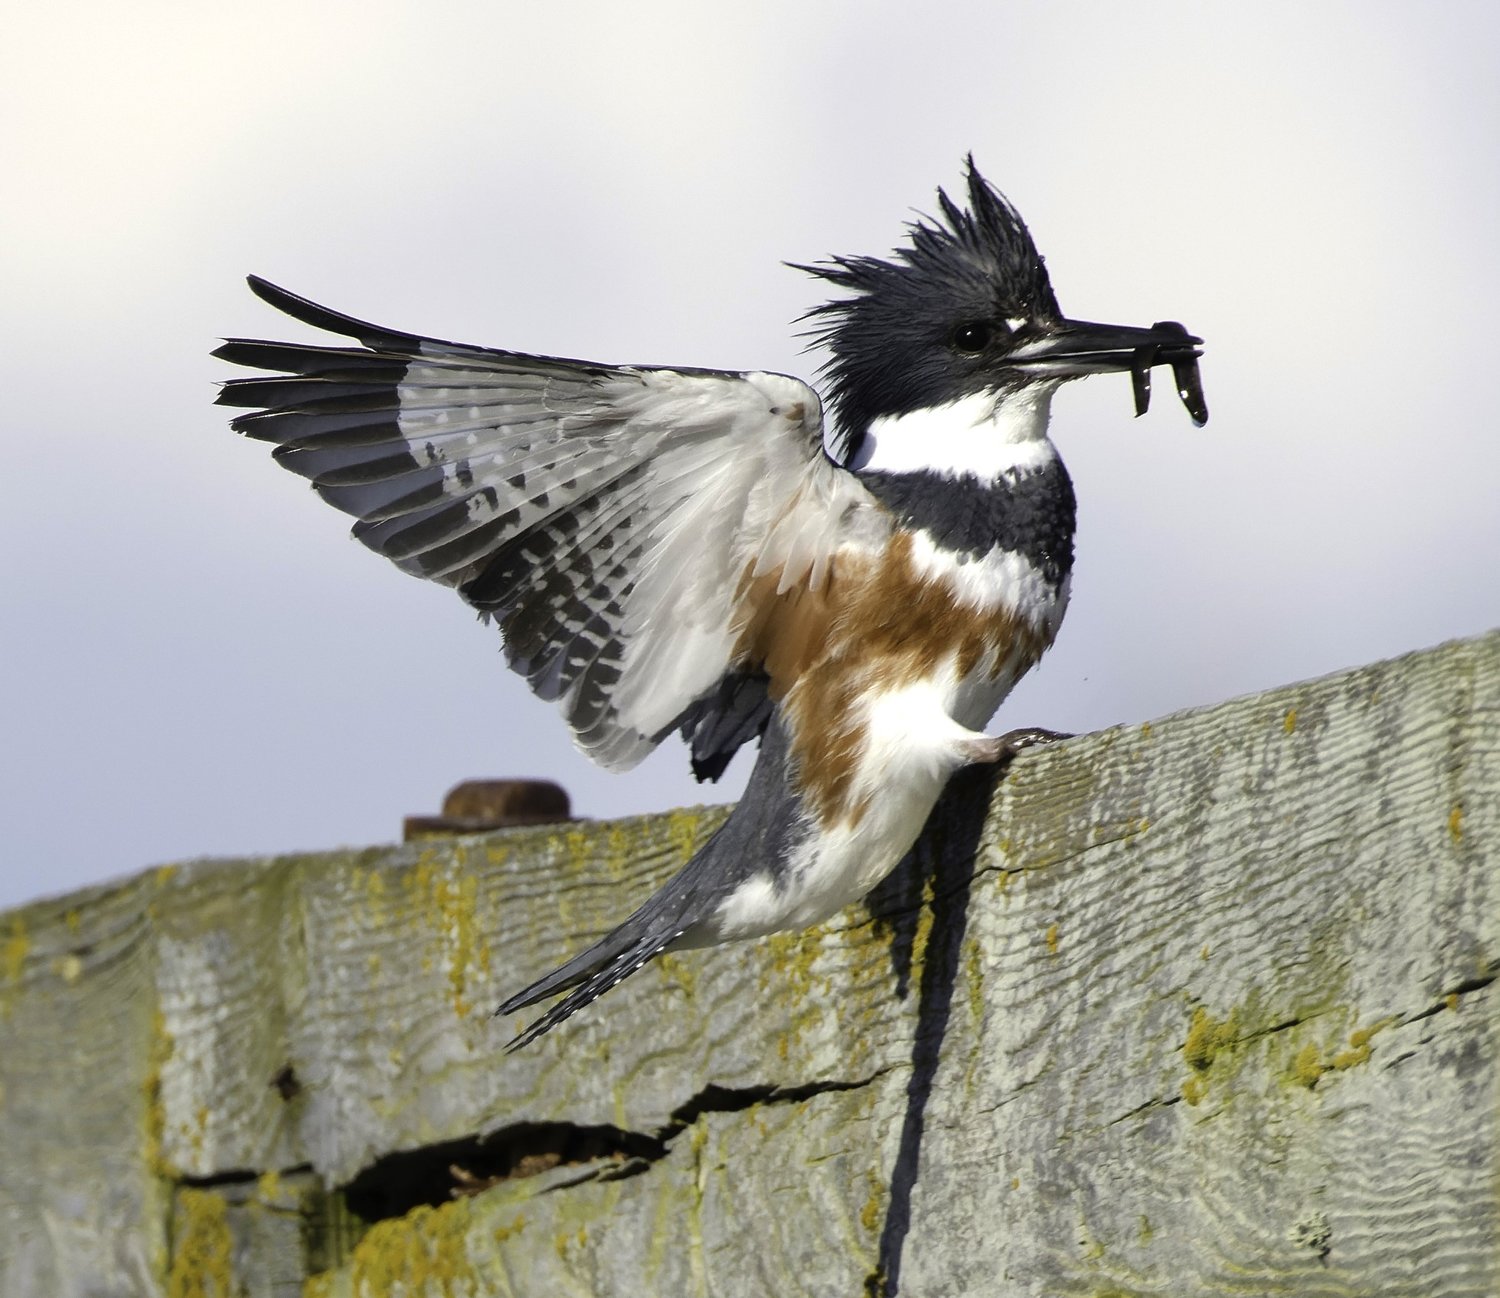 Natural history: Belted kingfishers